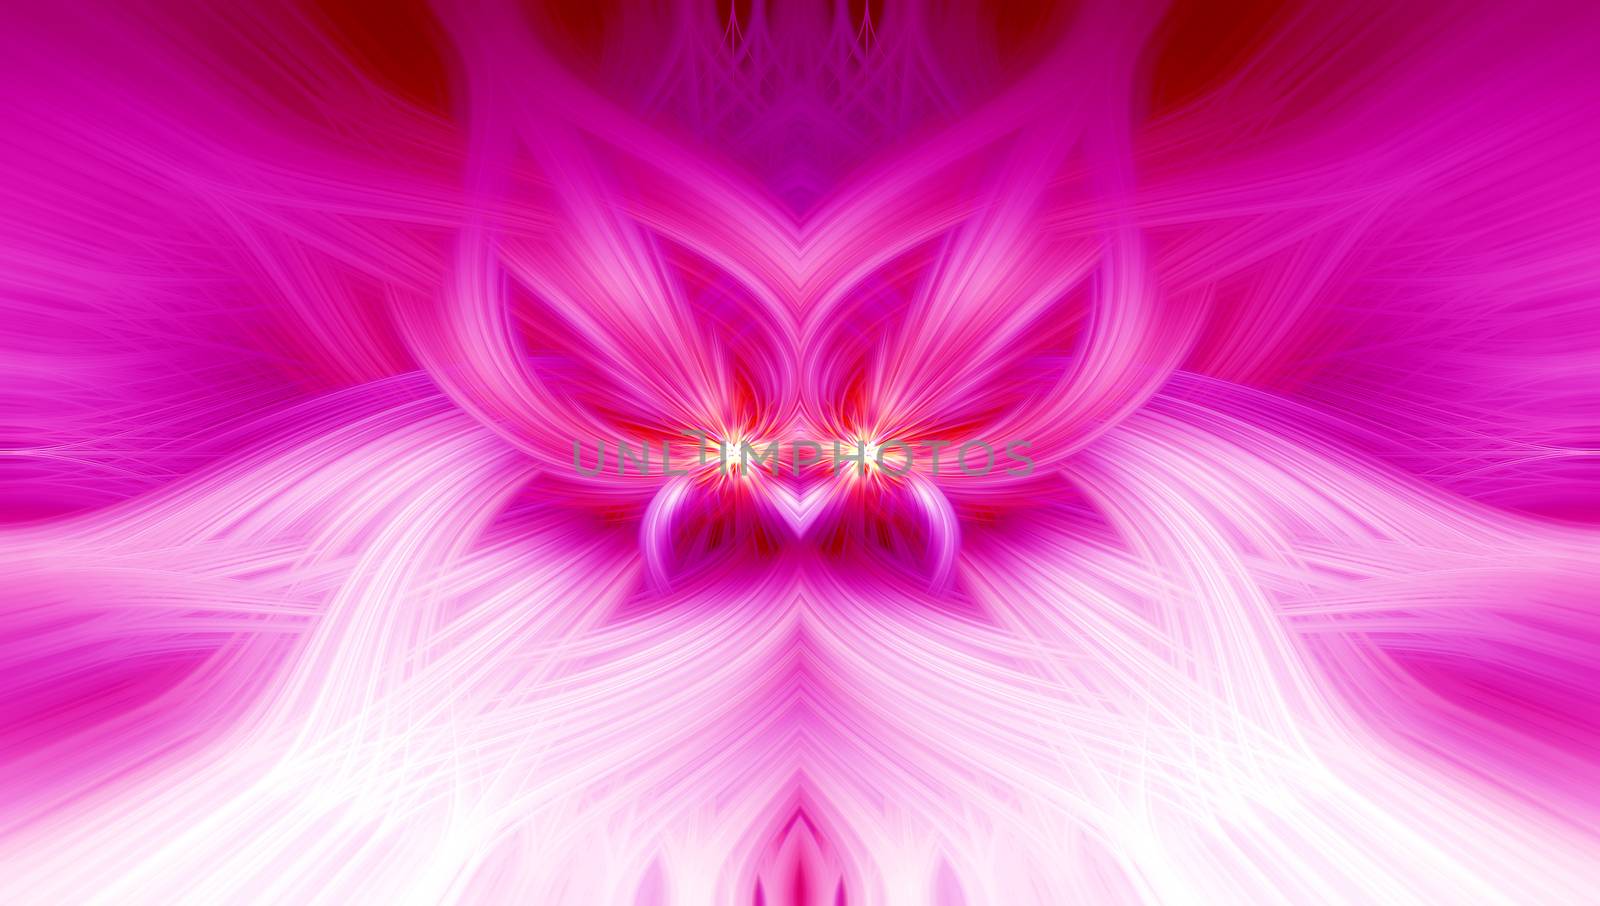 Beautiful abstract intertwined 3d fibers forming a shape of sparkle, flame, flower, interlinked hearts. Pink, purple, maroon and red colors. Illustration. by DamantisZ